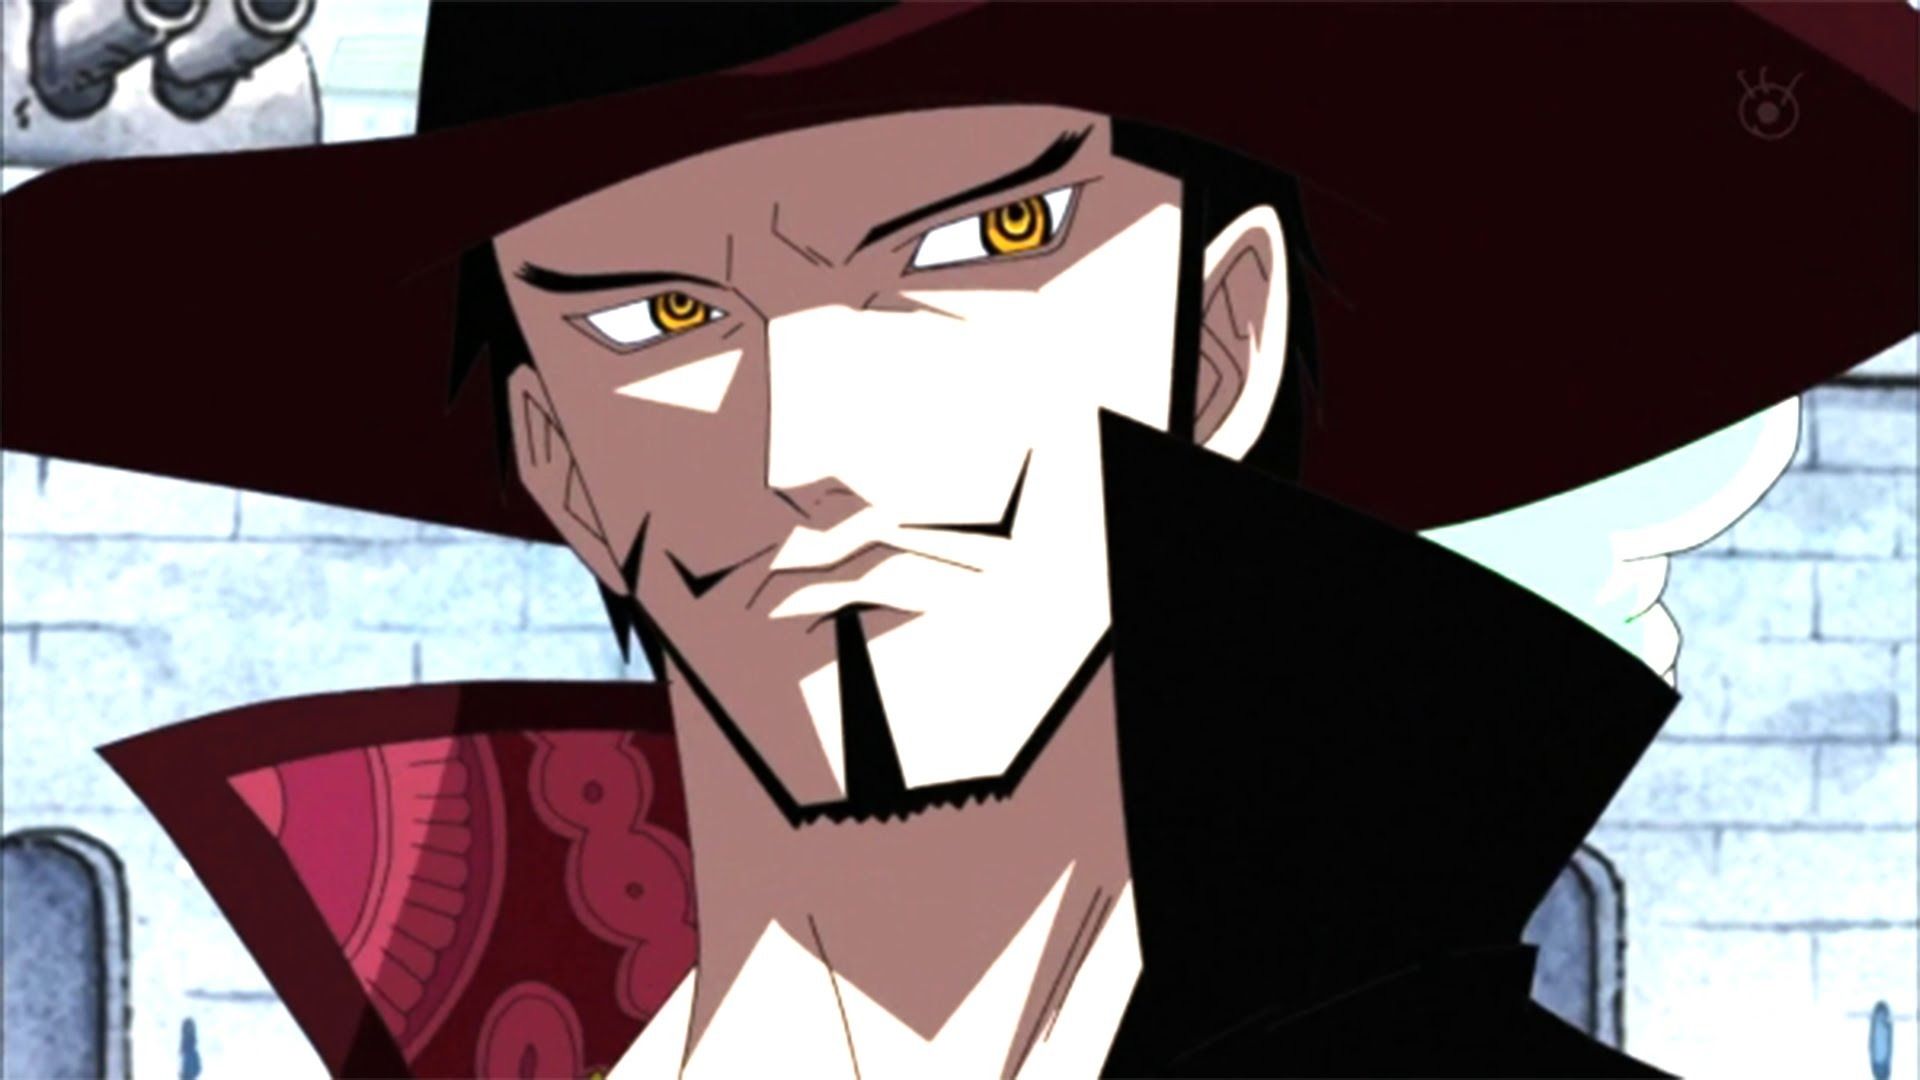 Mihawk neutral face eyes looking to the side